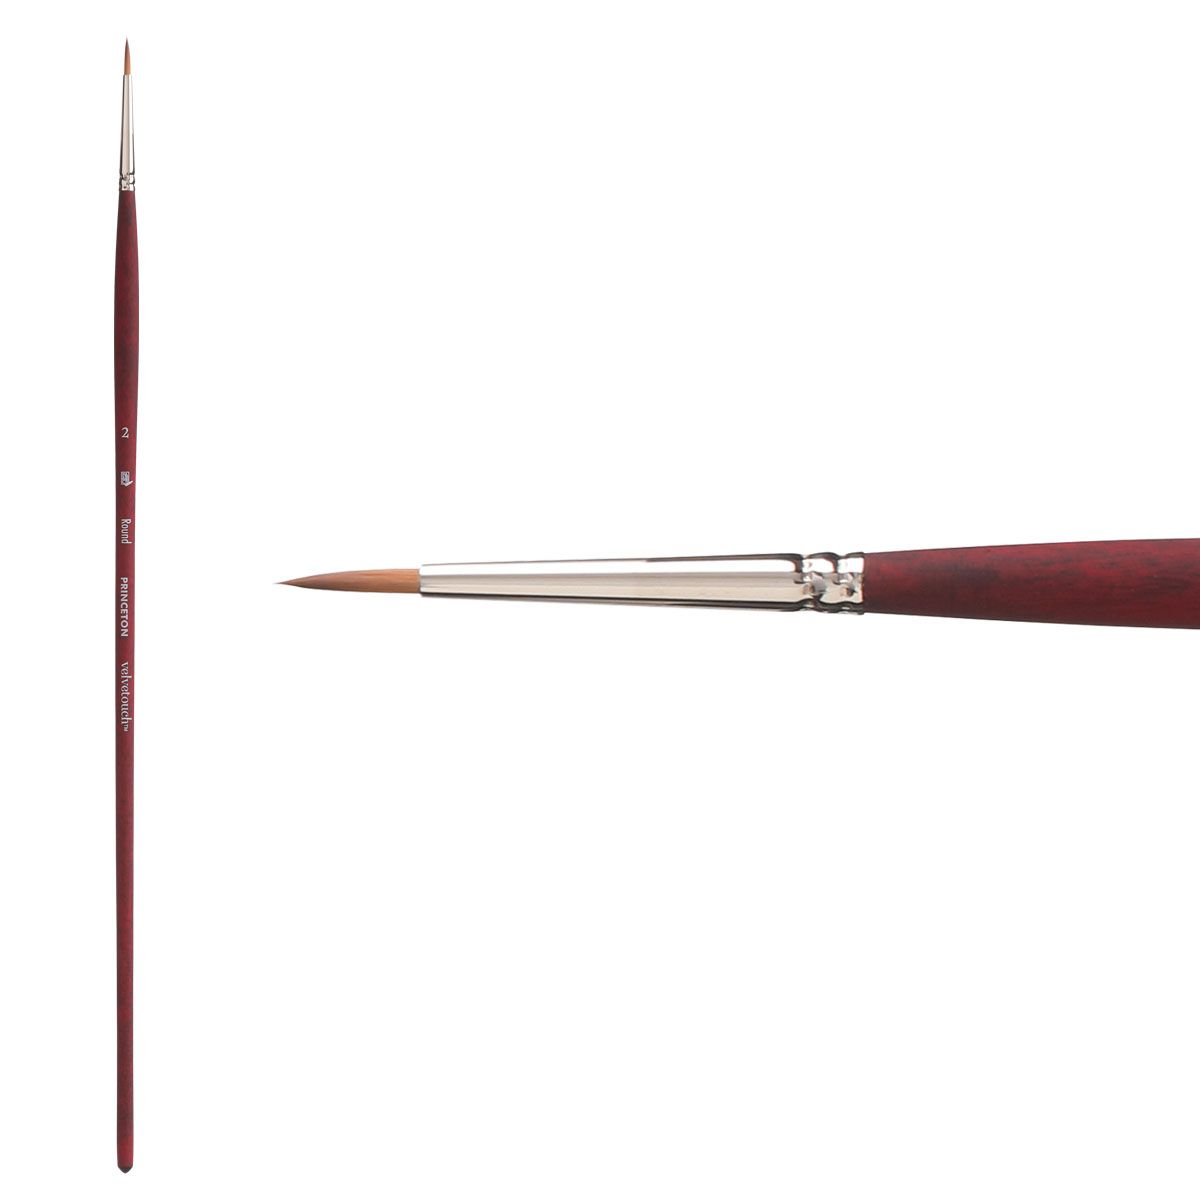 Velvetouch Synthetic Long Handle Series 3900 Brush, Round Size #2